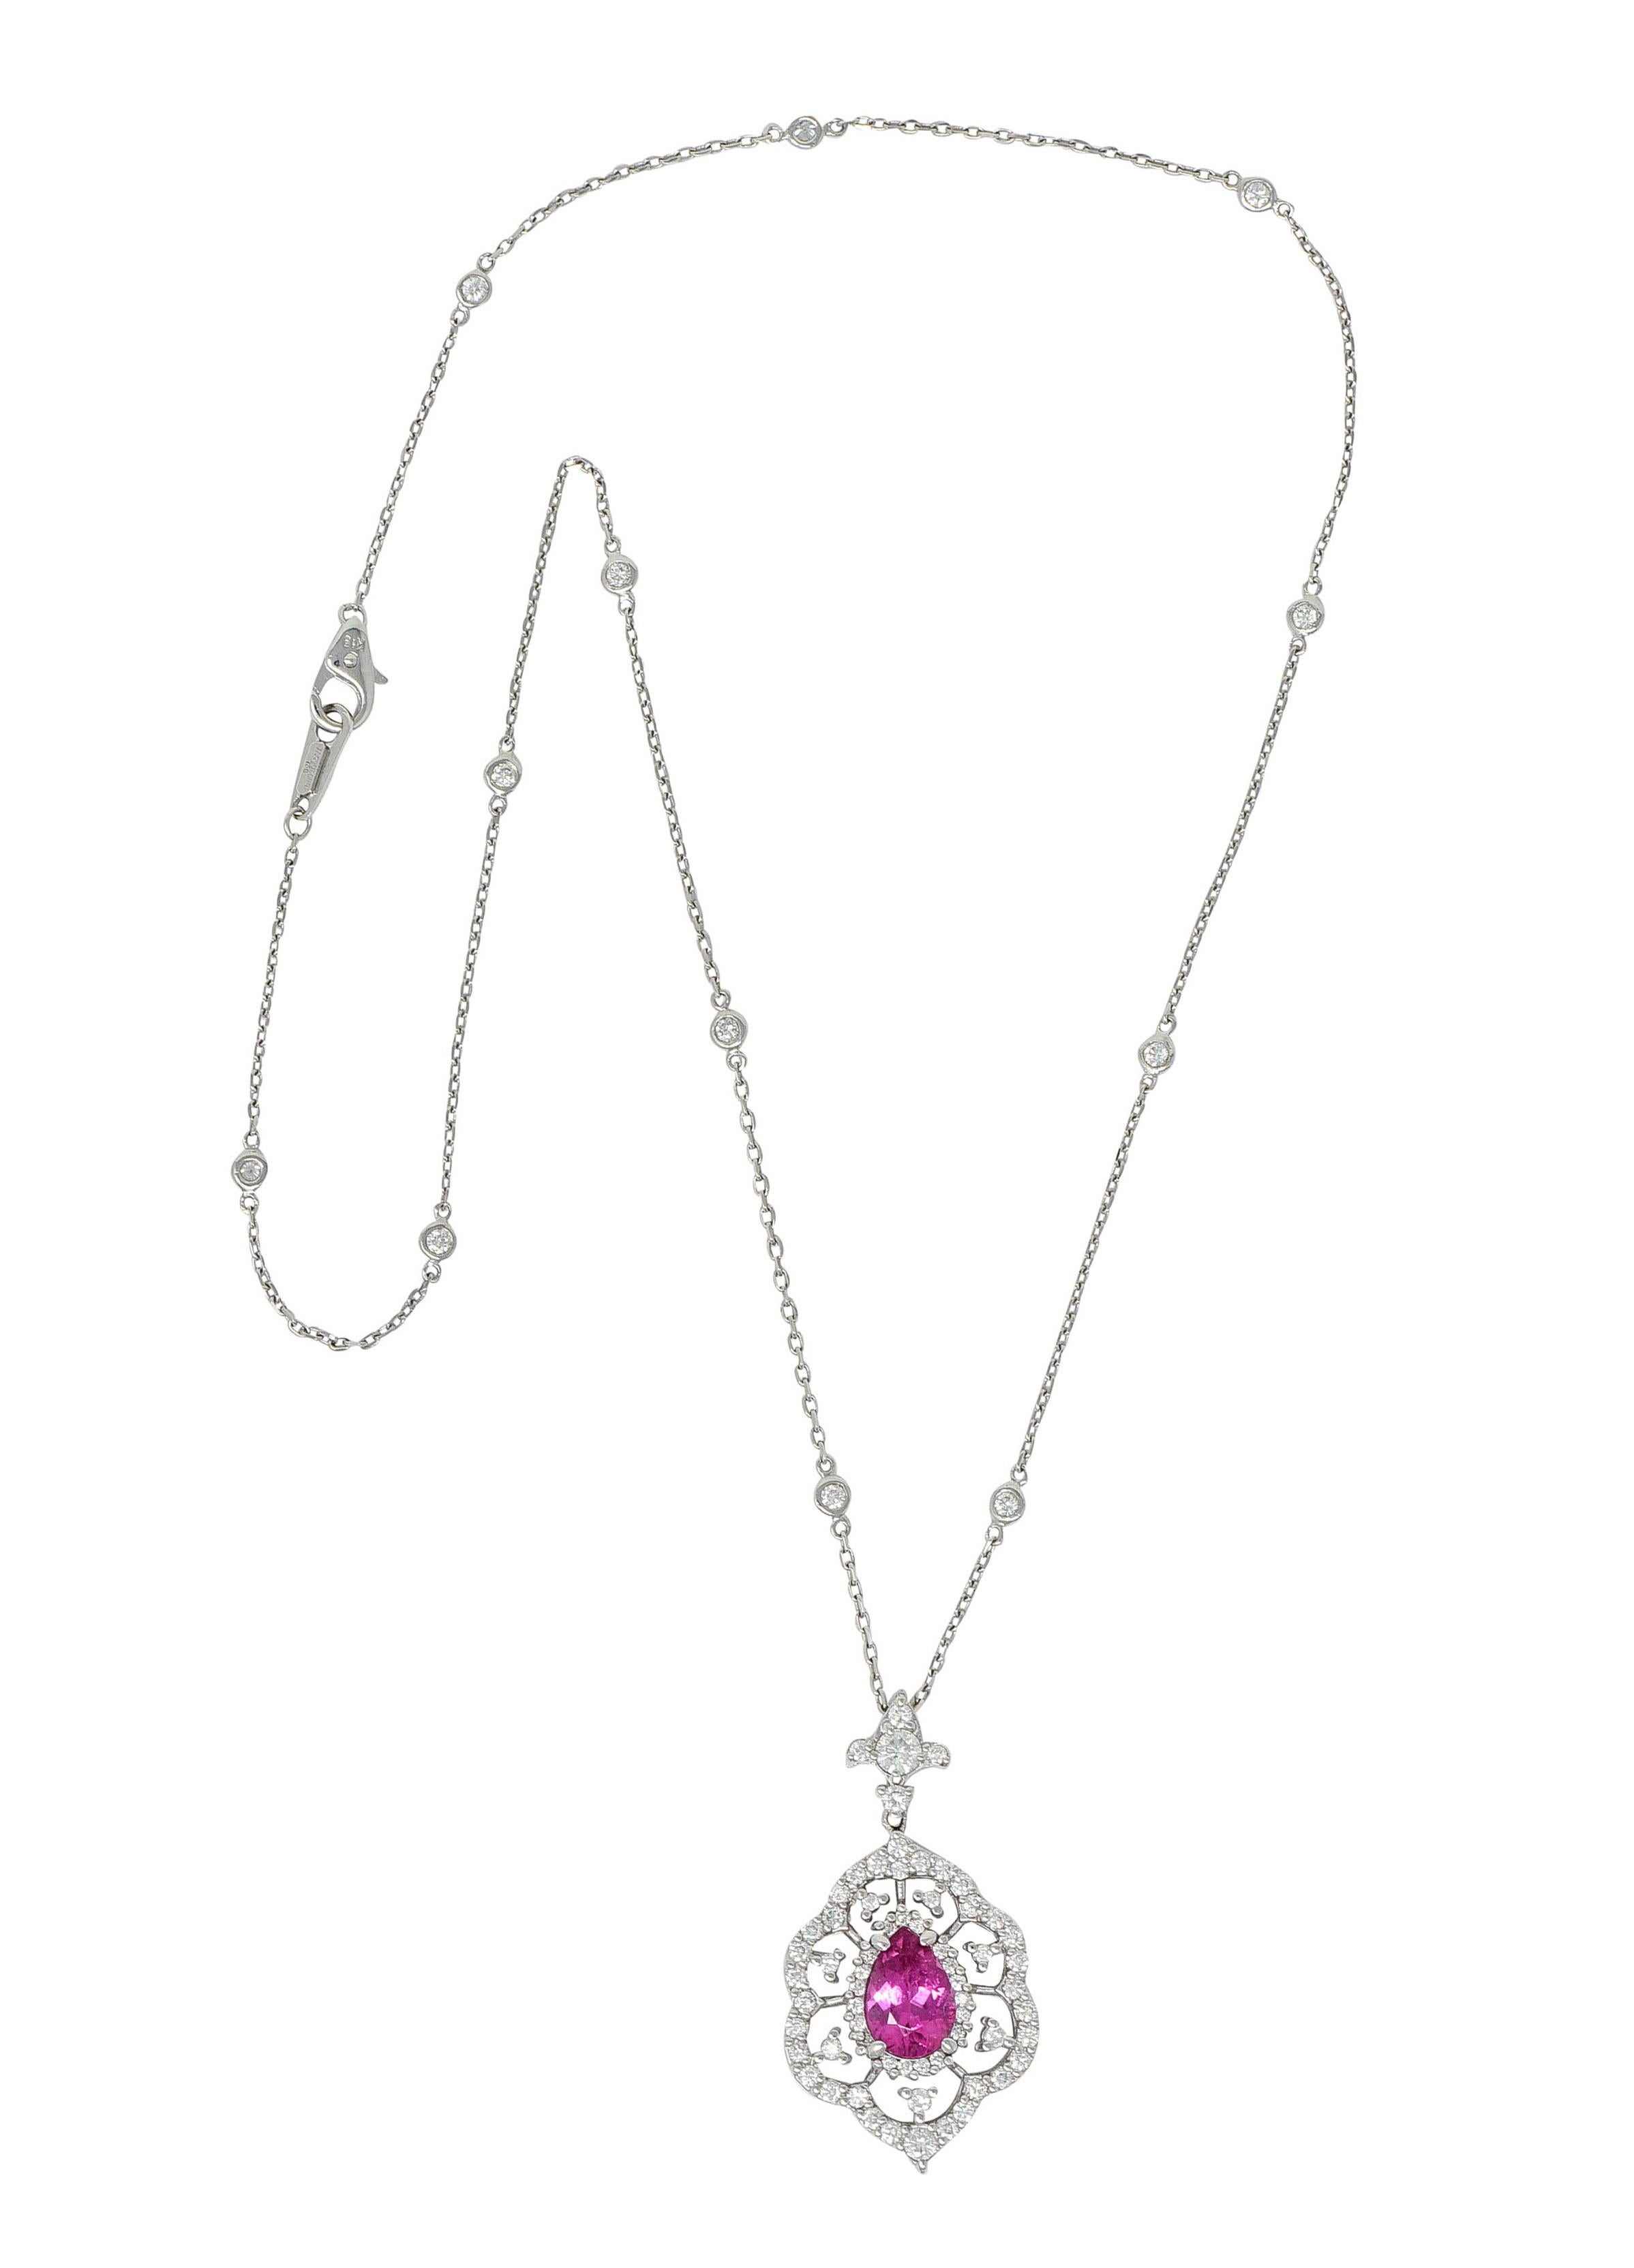 Diamonds-by-the-yard style cable chain necklace features ten bezel set round brilliant cut diamond stations

Suspending a grandiose cluster pendant centering a pear cut tourmaline measuring approximately 10.0 x 6.2; hot pink in color

With a